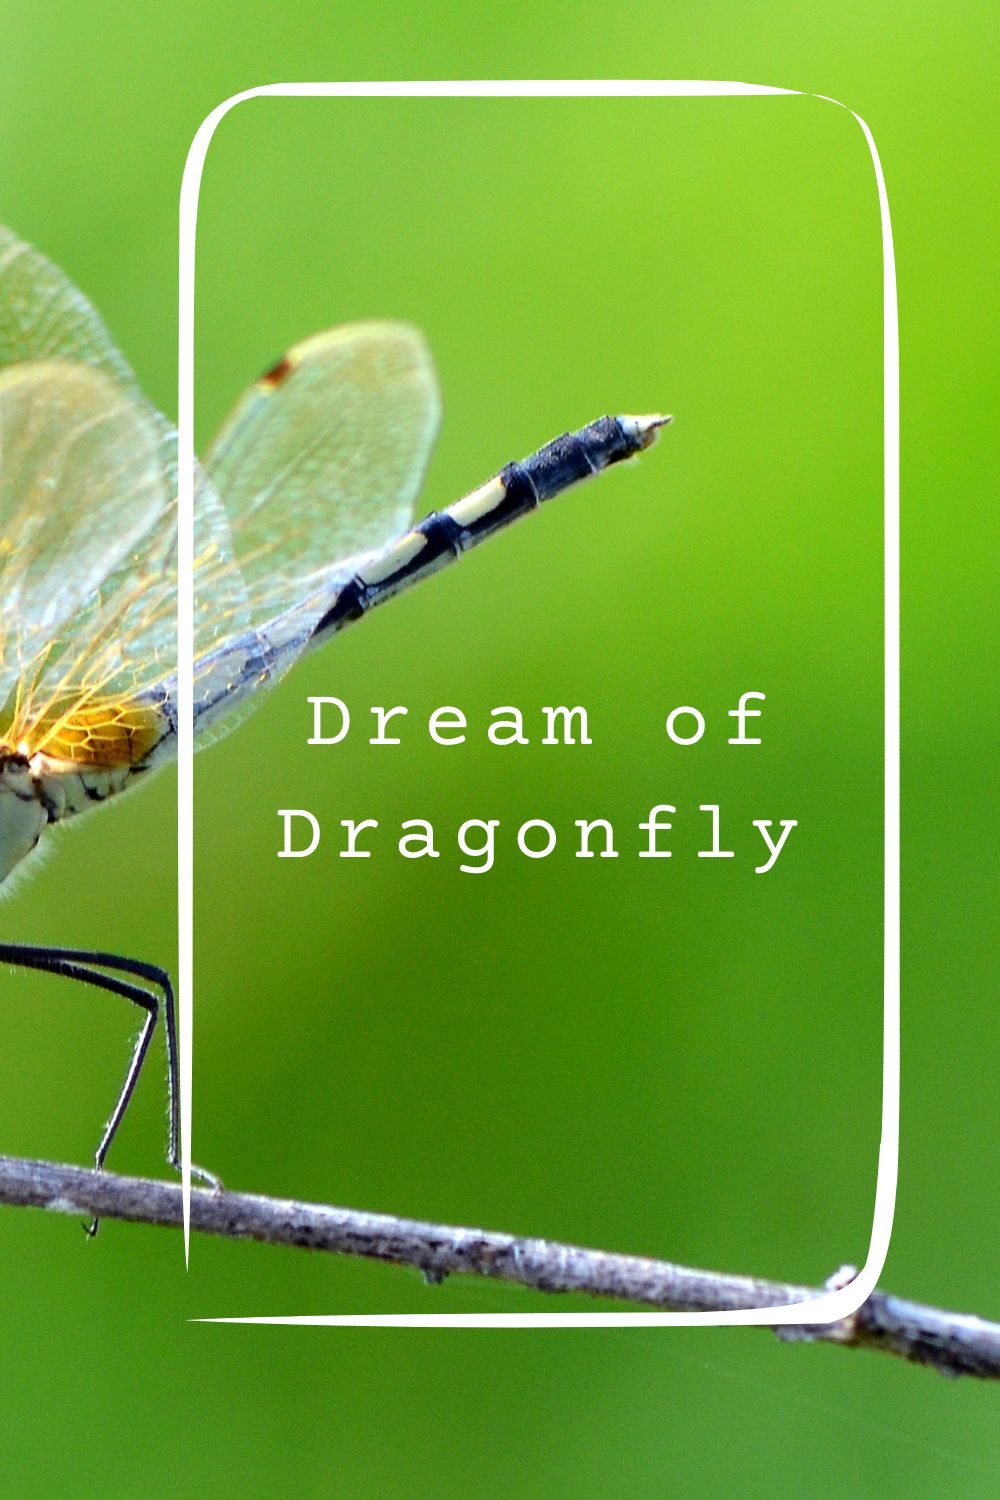 Dream of Dragonfly pin 1